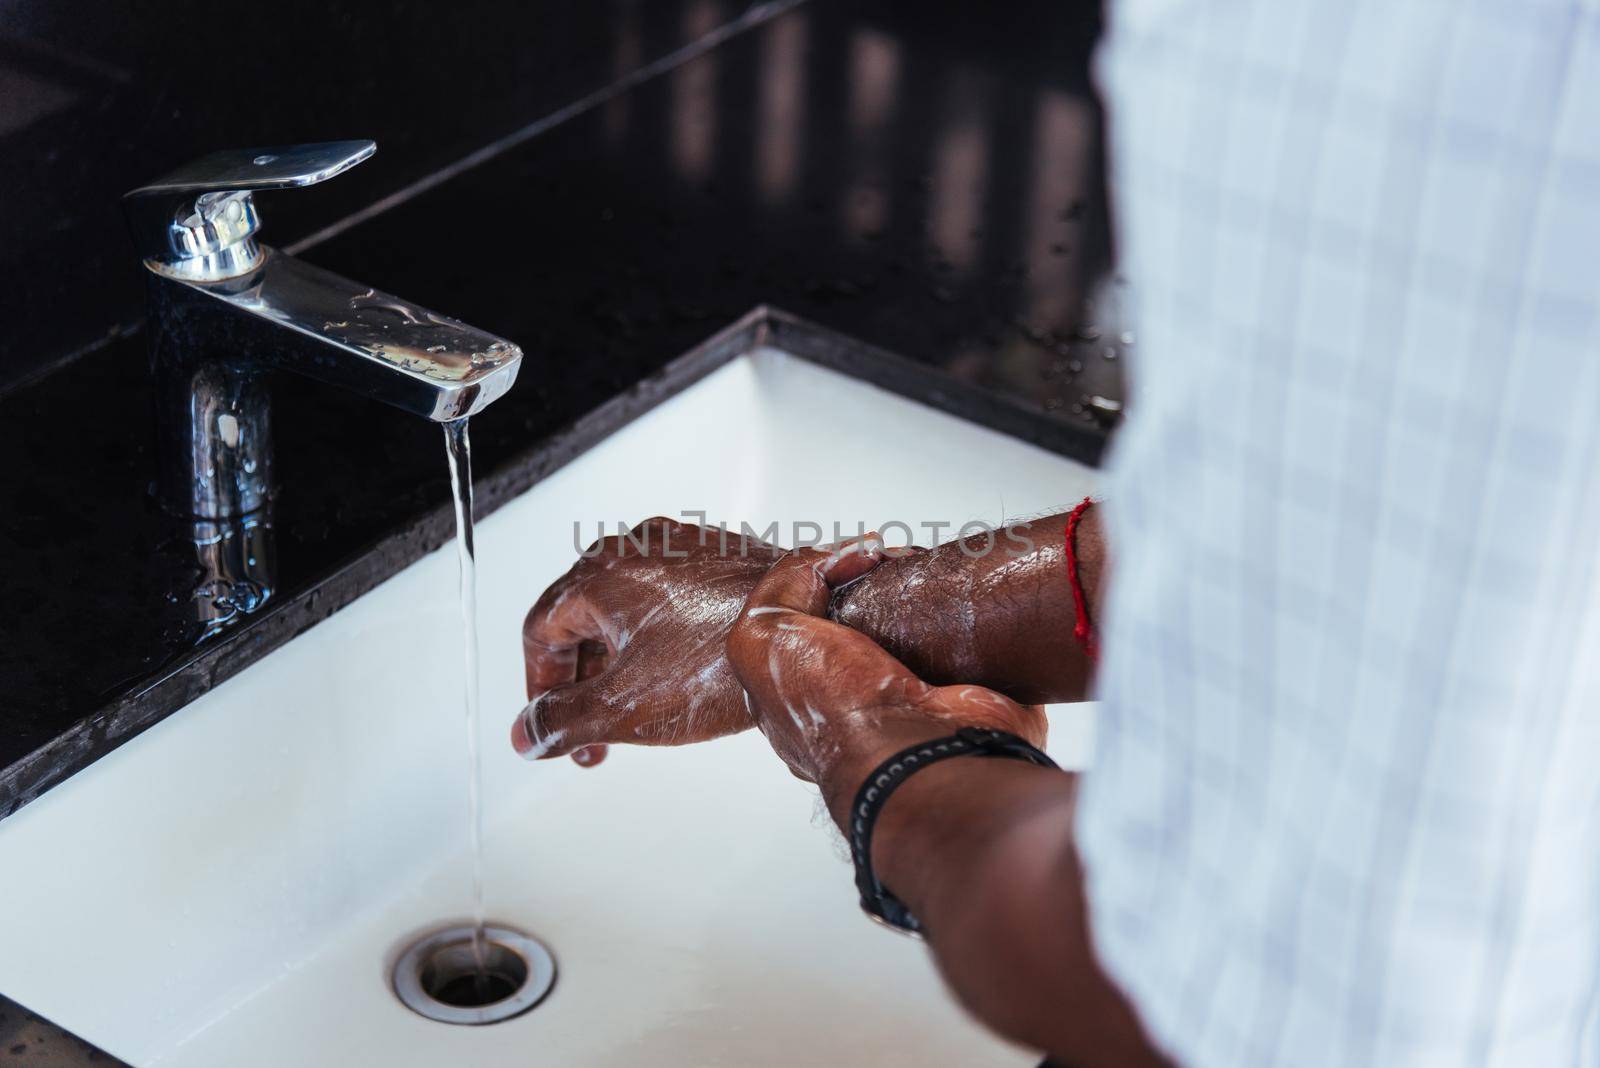 Closeup washing black man hands rubbing with soap and water in sinks to prevent outbreak coronavirus hygiene to stop spreading virus, hygiene for quarantine cleaning COVID-19 concept